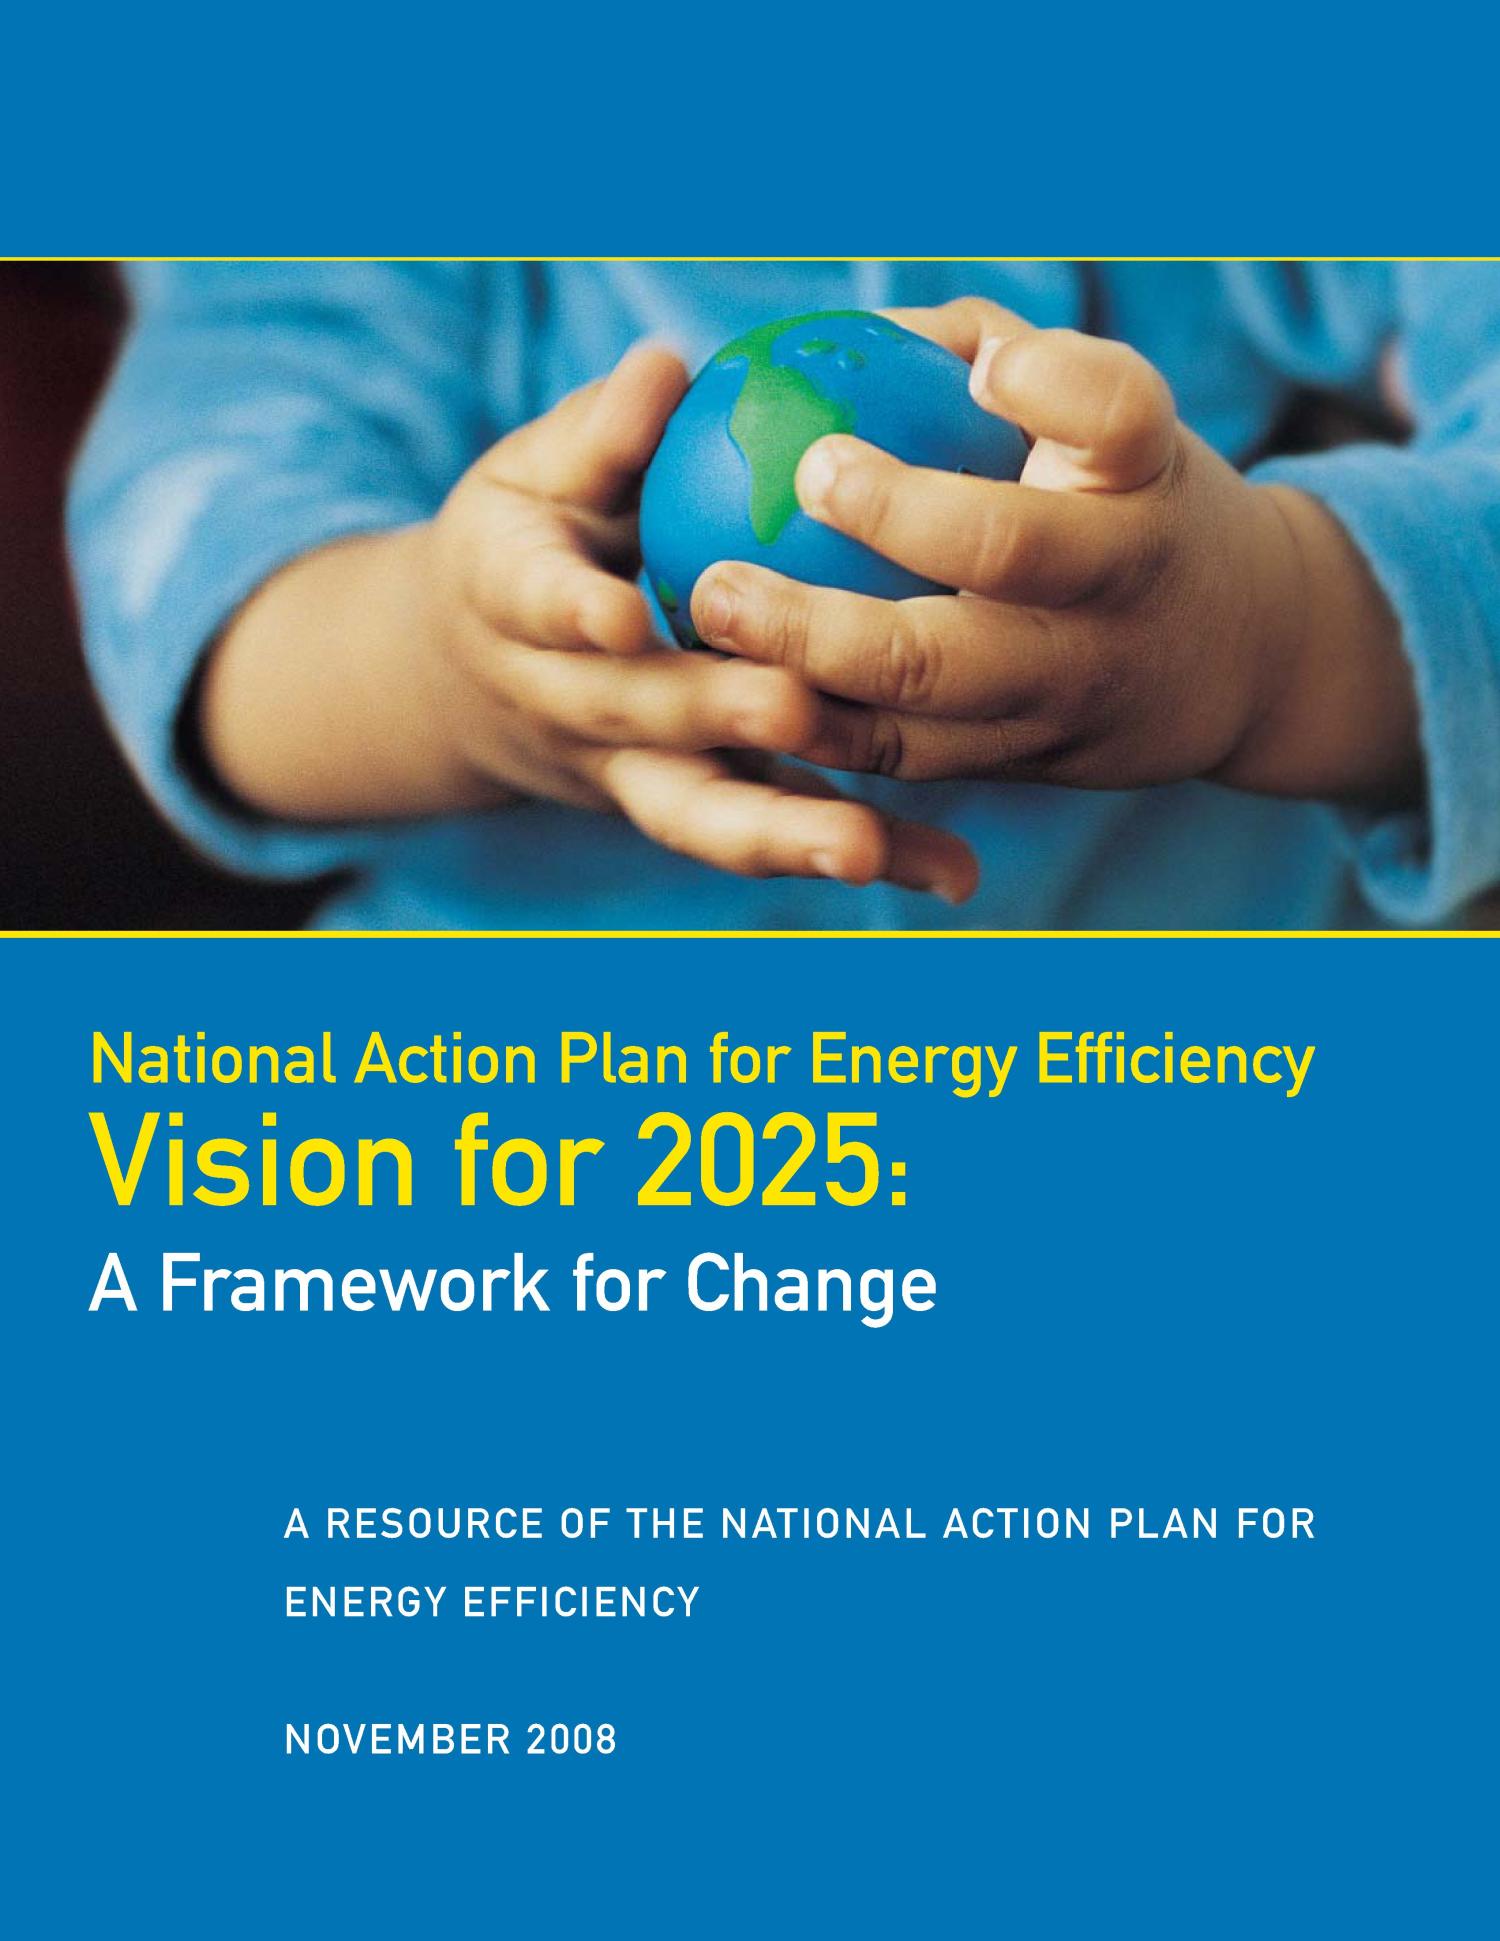 National Action Plan for Energy Efficiency Vision for 2025 A Framework